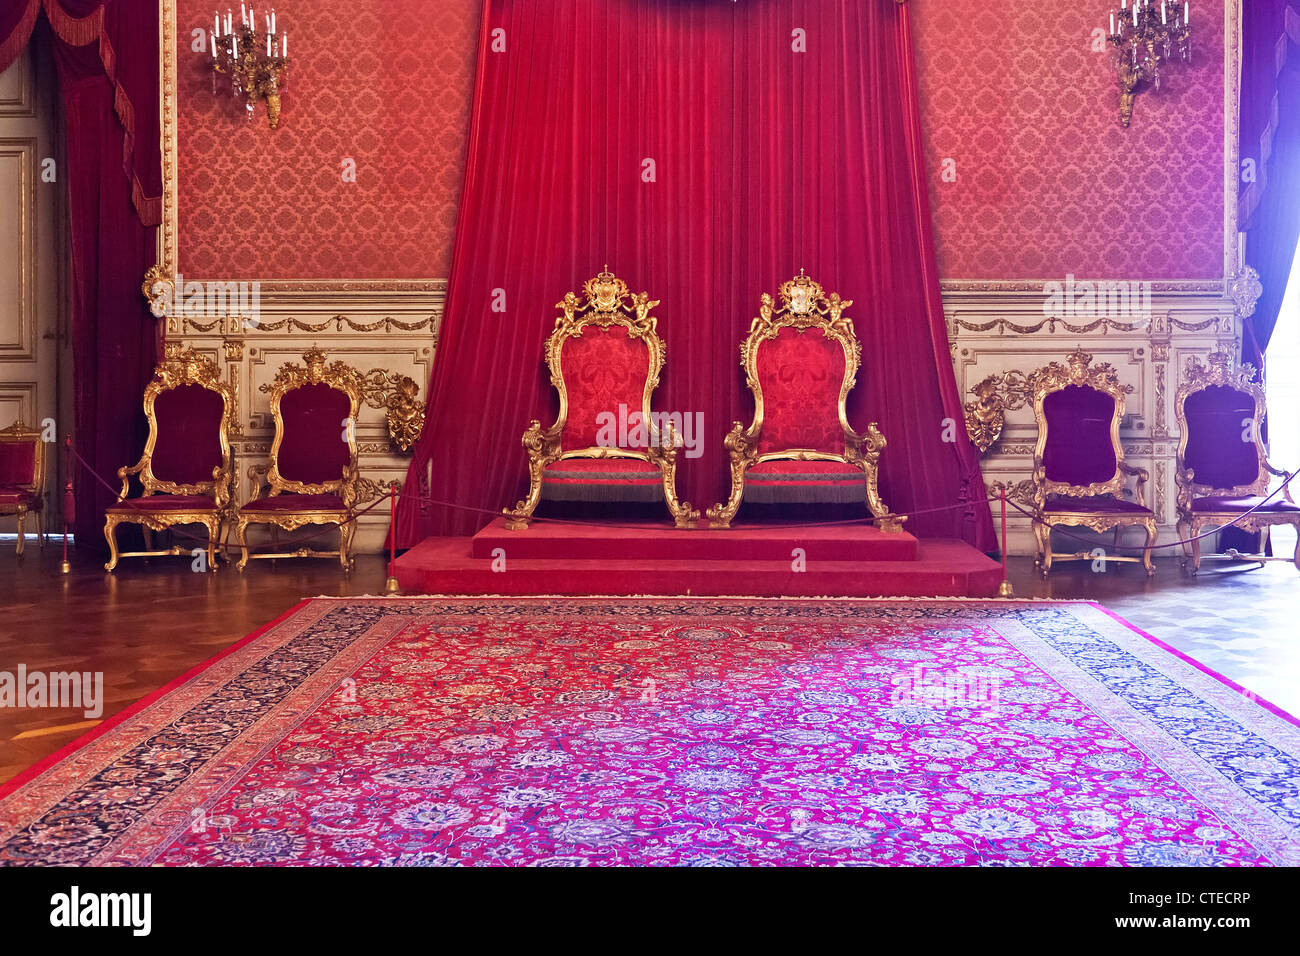 Throne Room of the Ajuda National Palace, Lisbon, Portugal. 19th century neoclassical Royal palace / throne thrones Throne Thrones king queen red Stock Photo